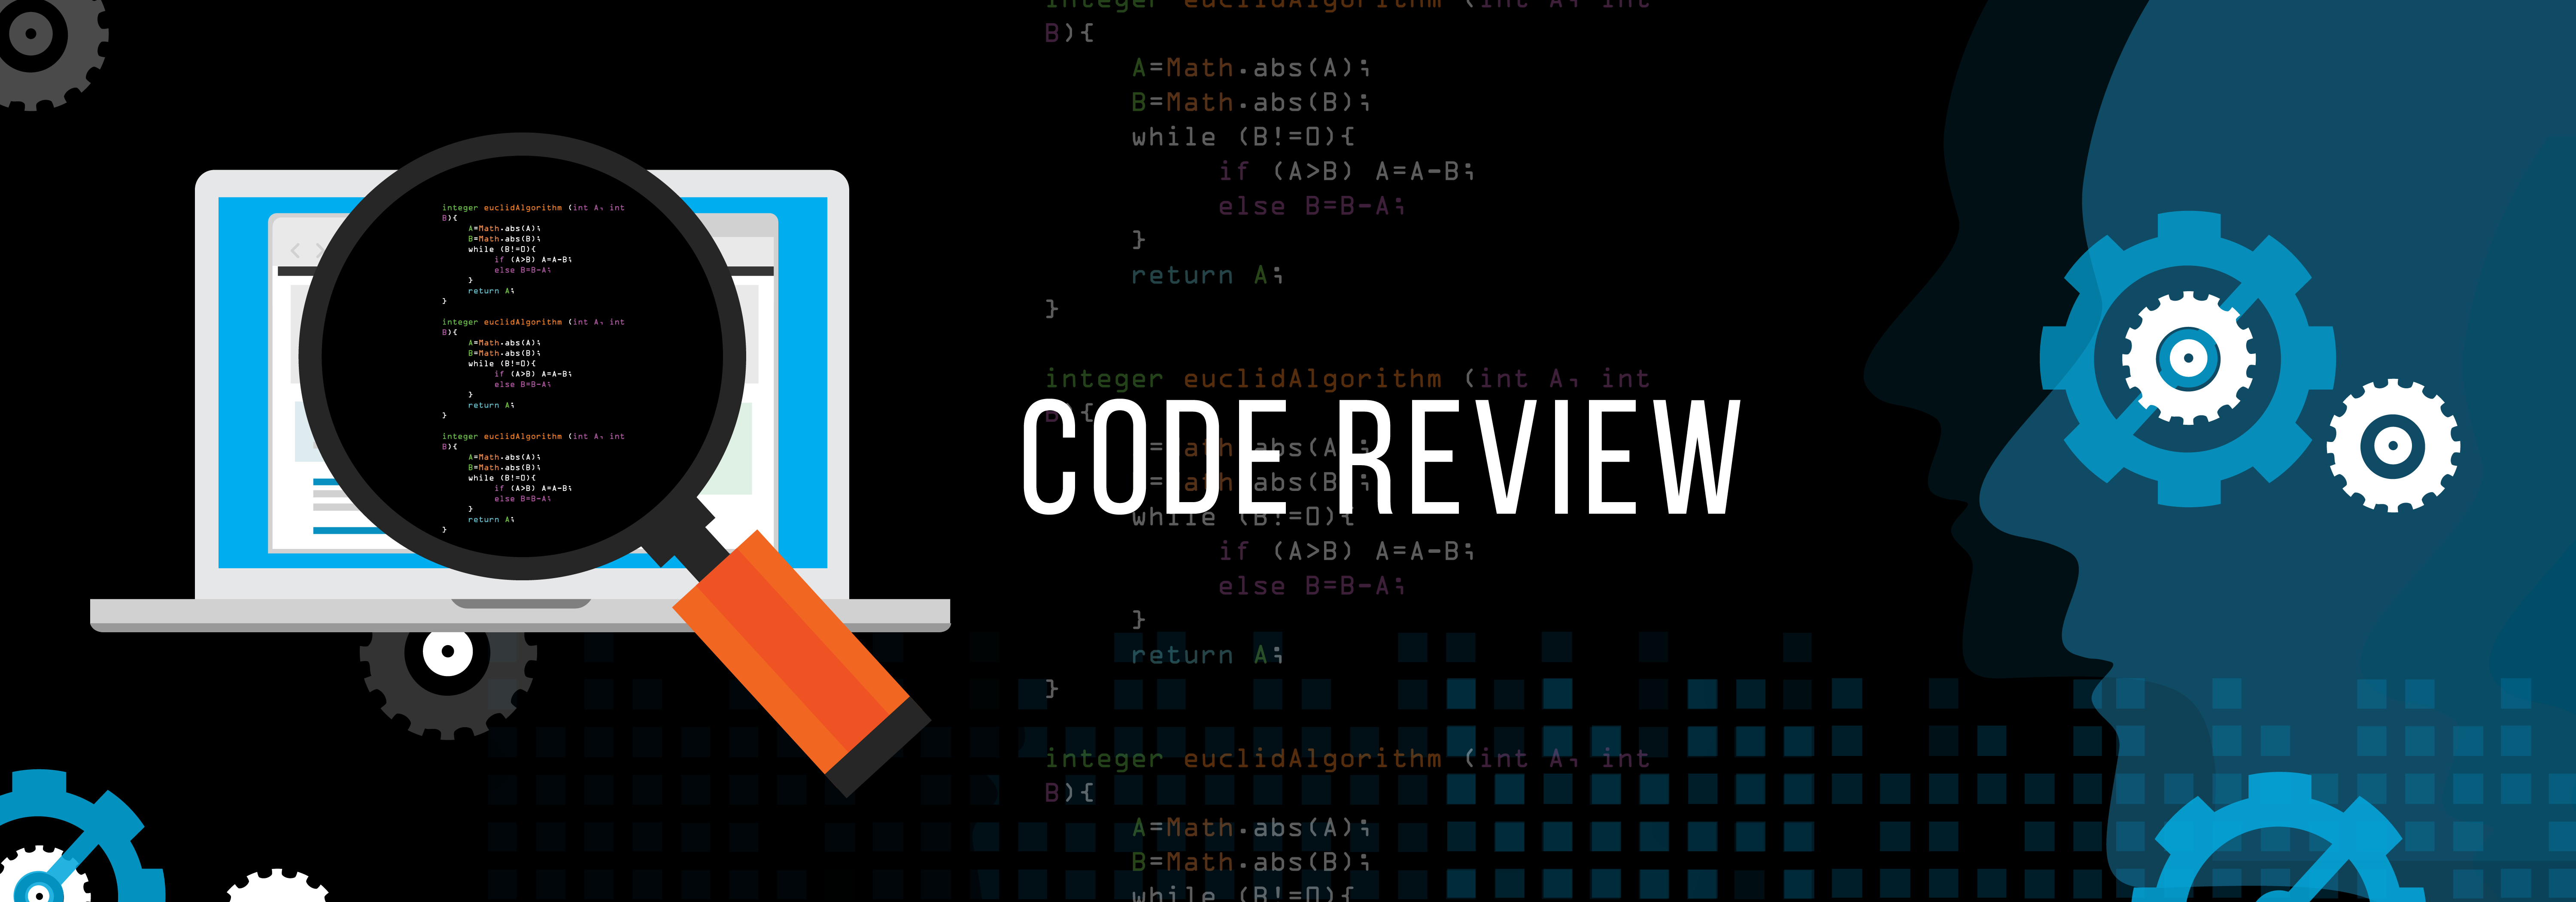 Code-Review